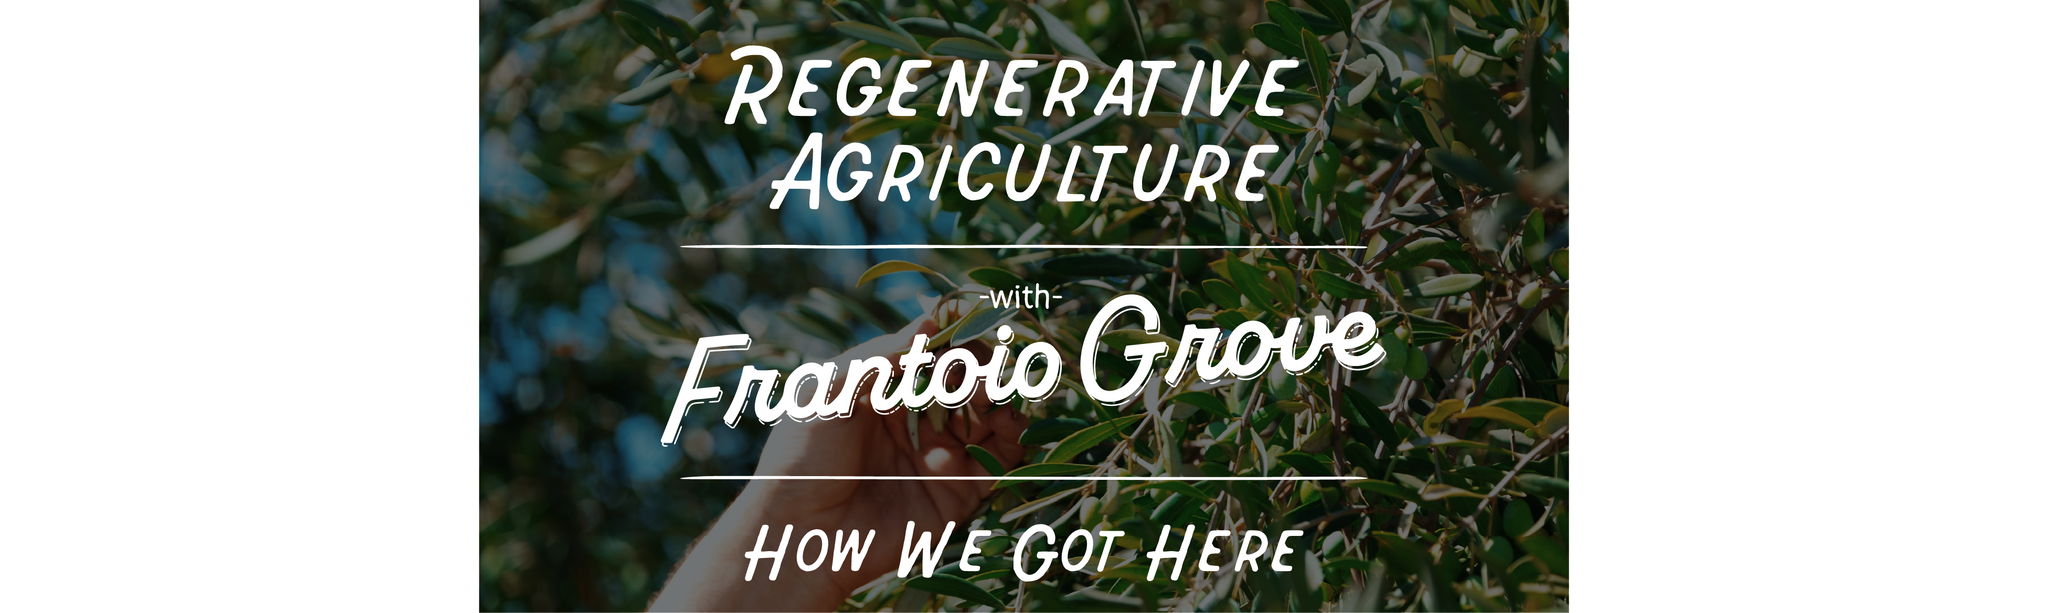 Field Report: Regenerative Agriculture, How We Got Here